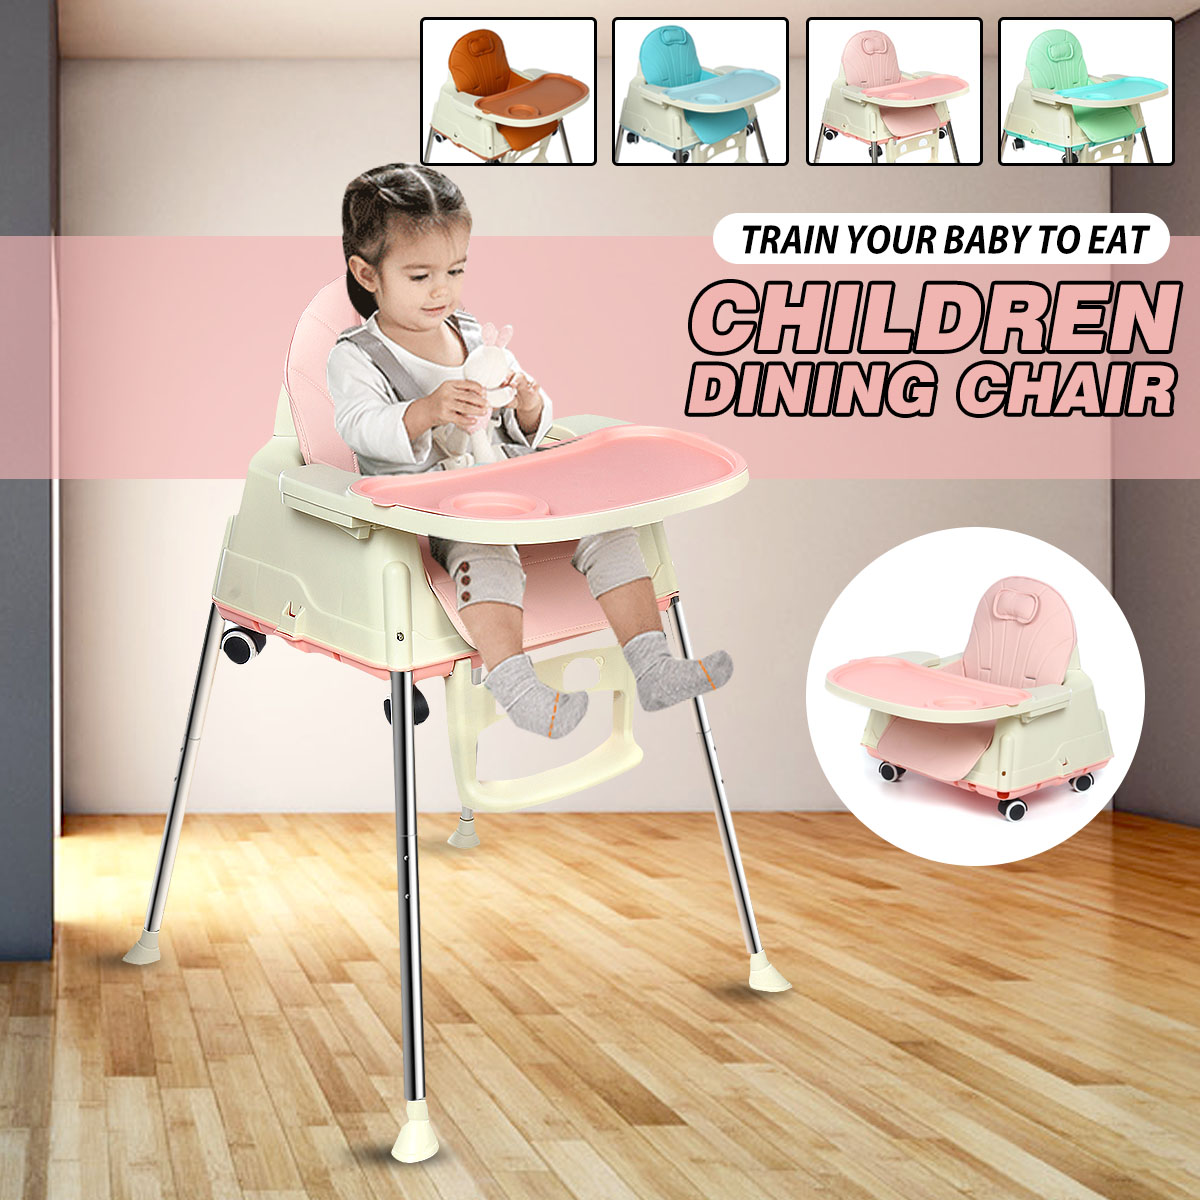 Childrens-Dining-Chair-Baby-Eating-Table-BB-Plastic-Multifunctional-Dining-Chair-Men-and-Women-Baby--1951925-17